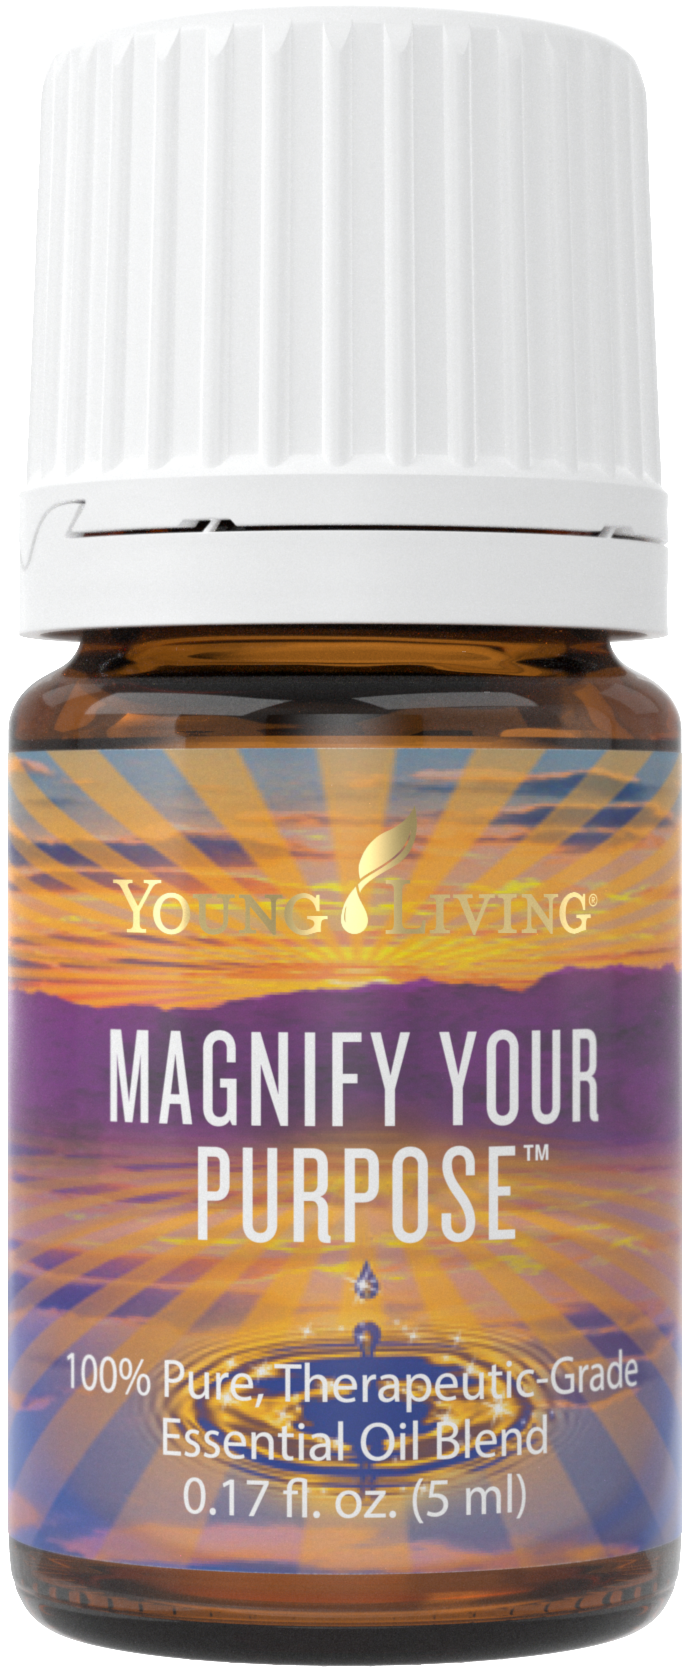 Magnify Your Purpose essential oil blend